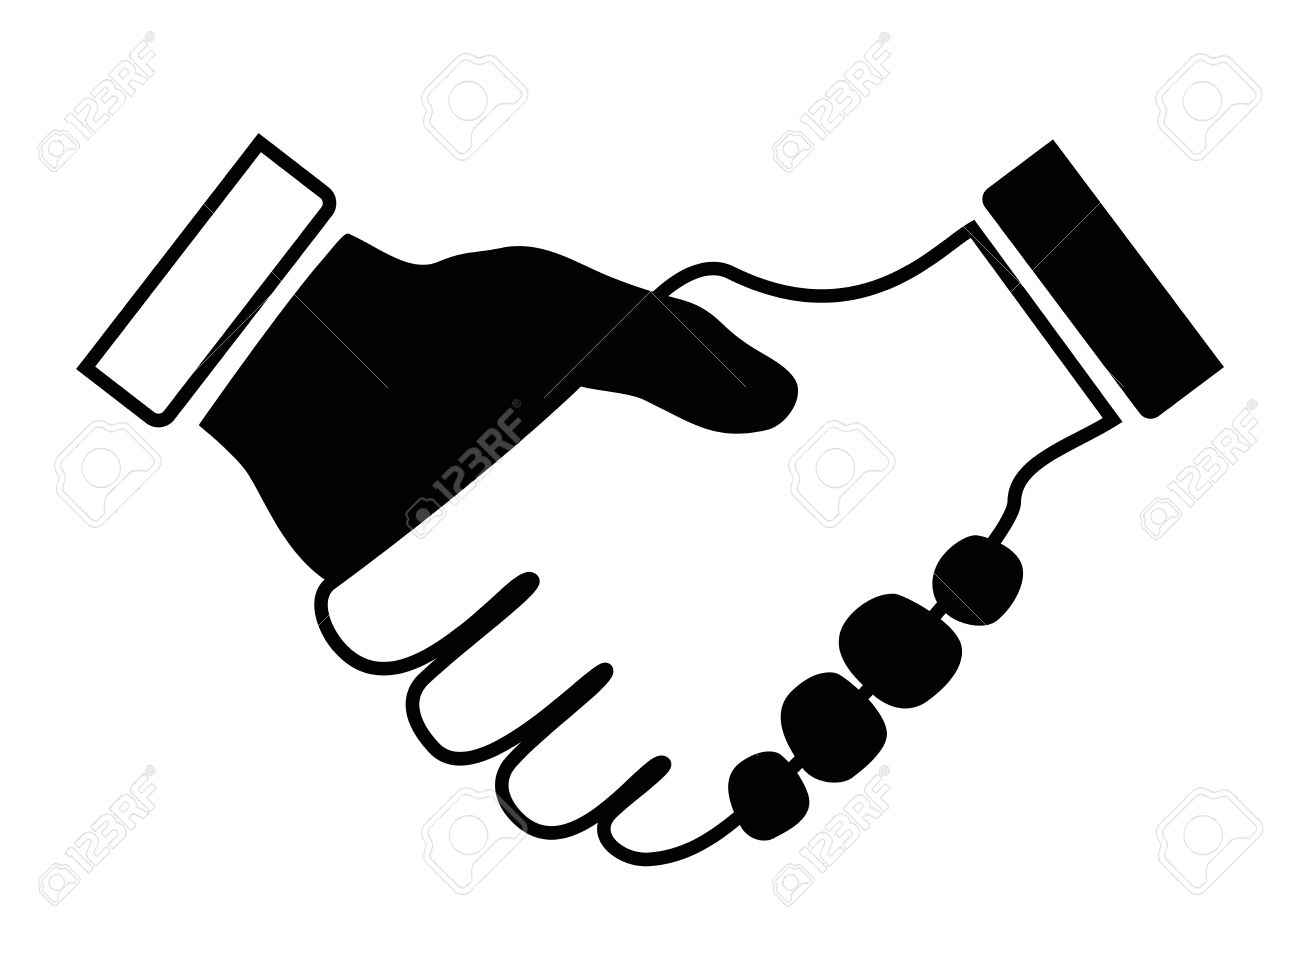 shaking hands clipart black and white 10 free Cliparts | Download